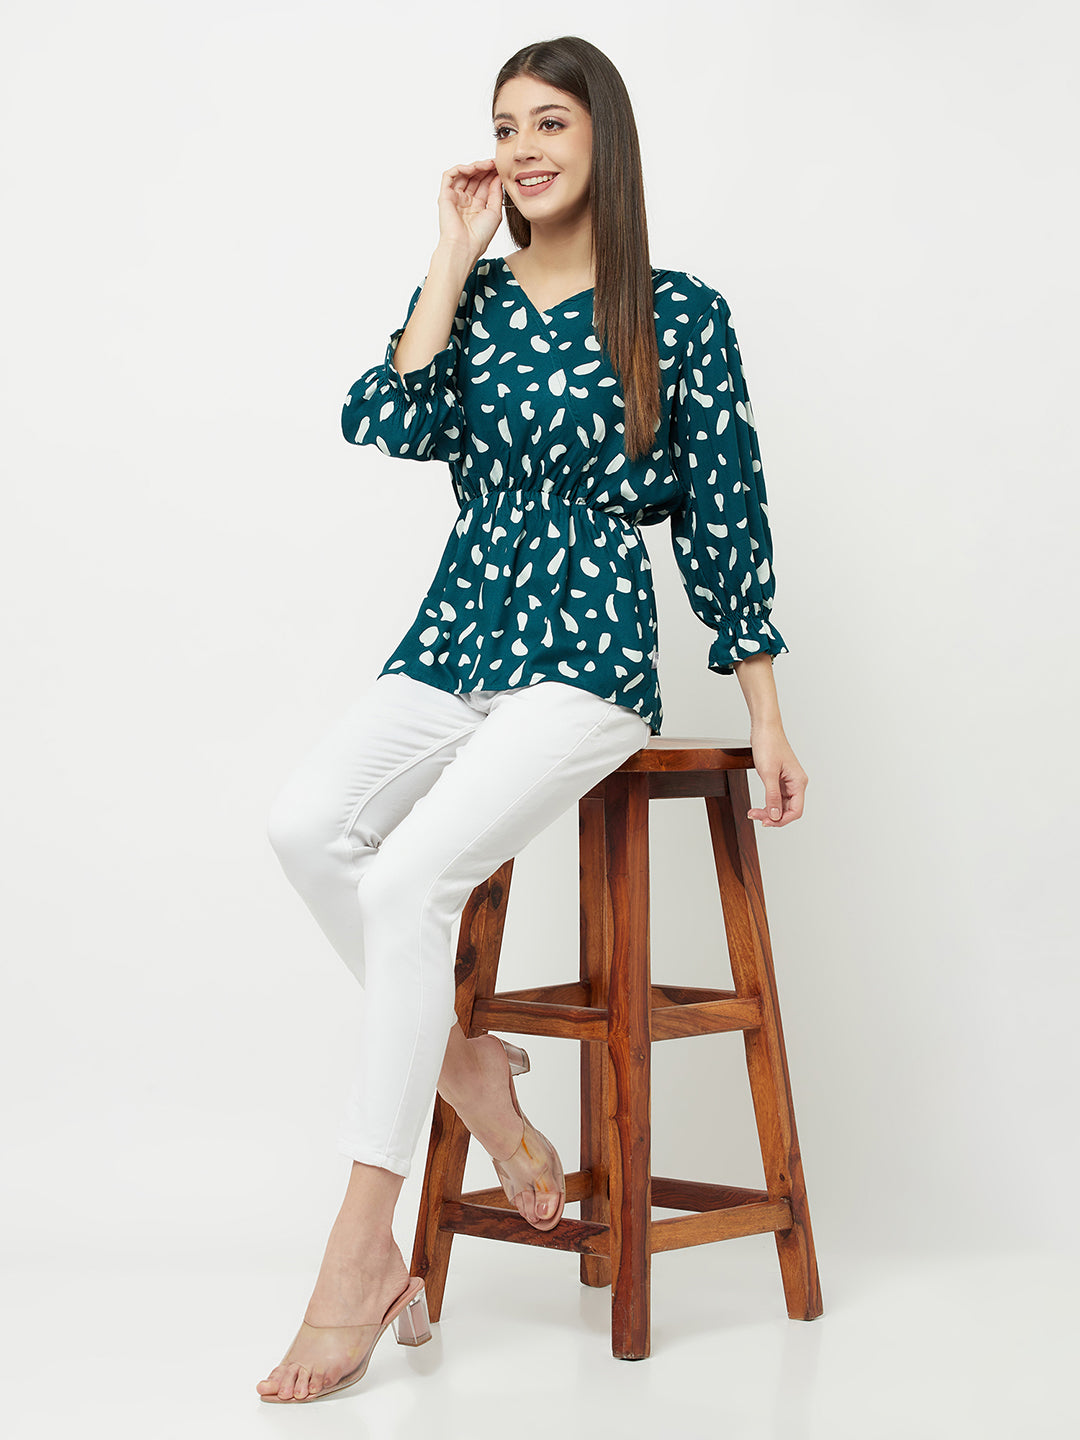 Teal Green Printed V-Neck Empire Top - Women Tops